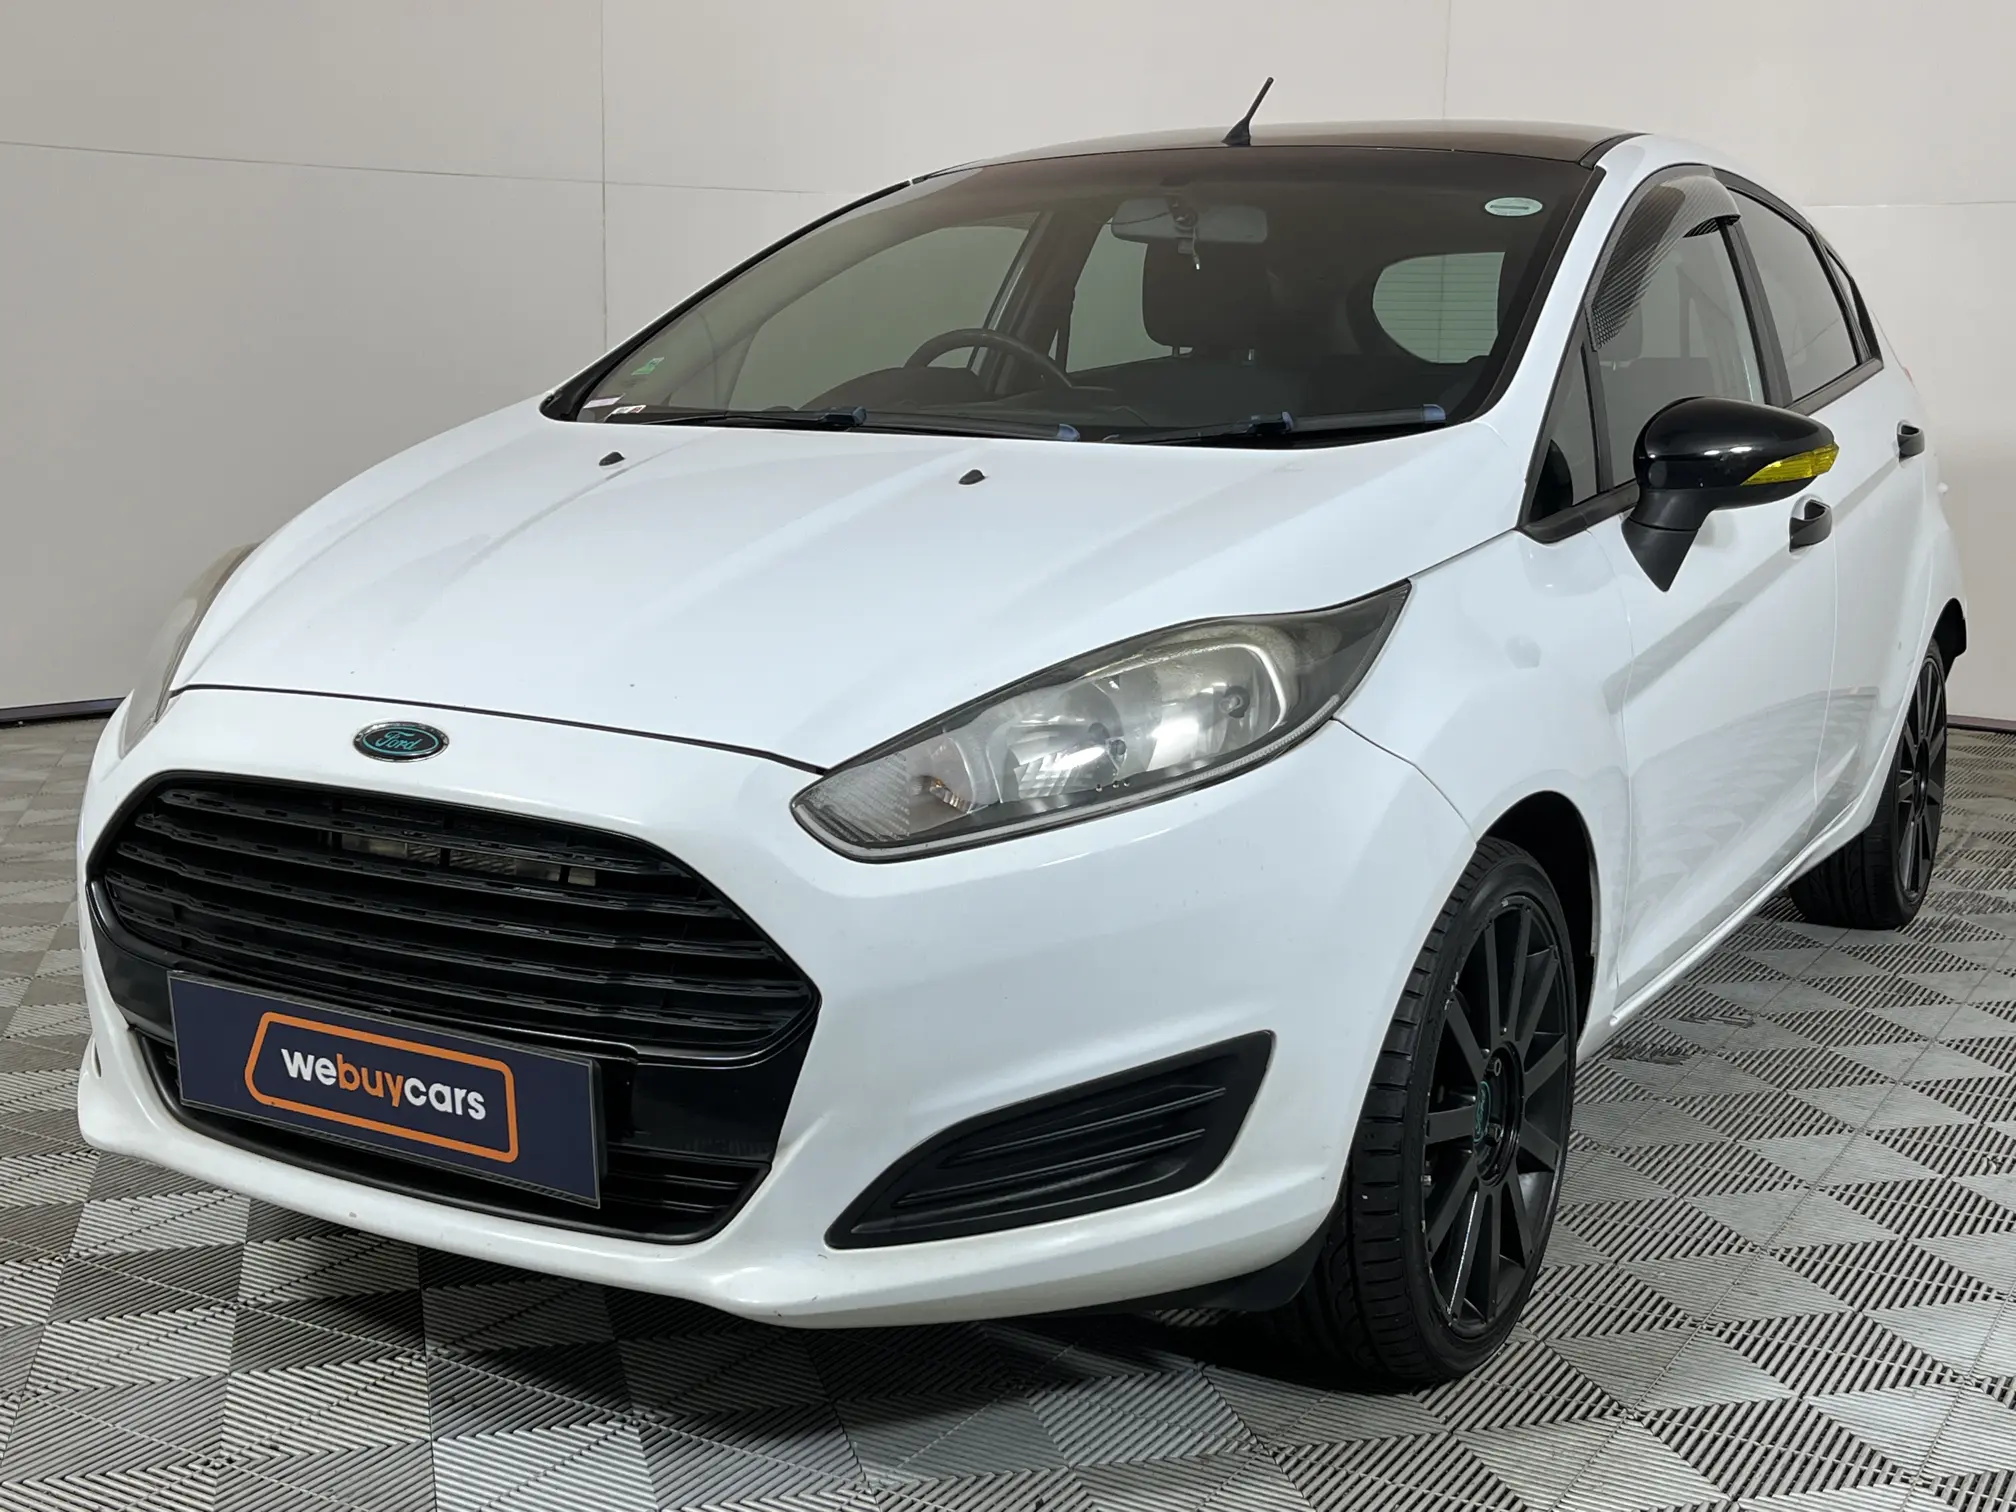 2015 Ford Fiesta 1.4 Ambiente 5 DR